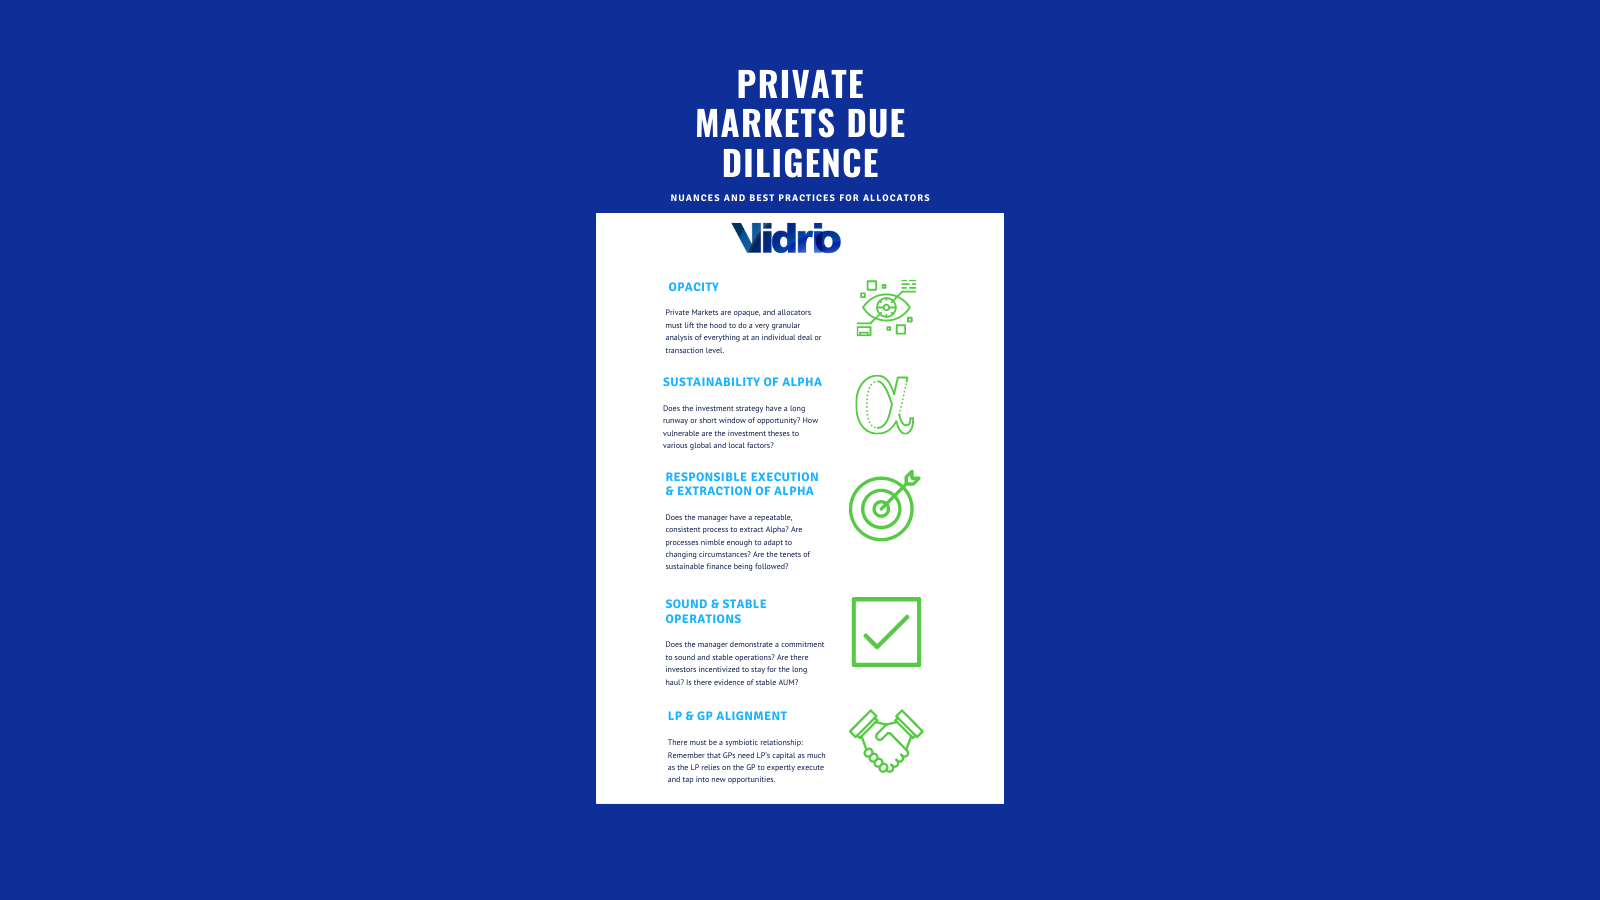 Private Markets Due Diligence in a New Era